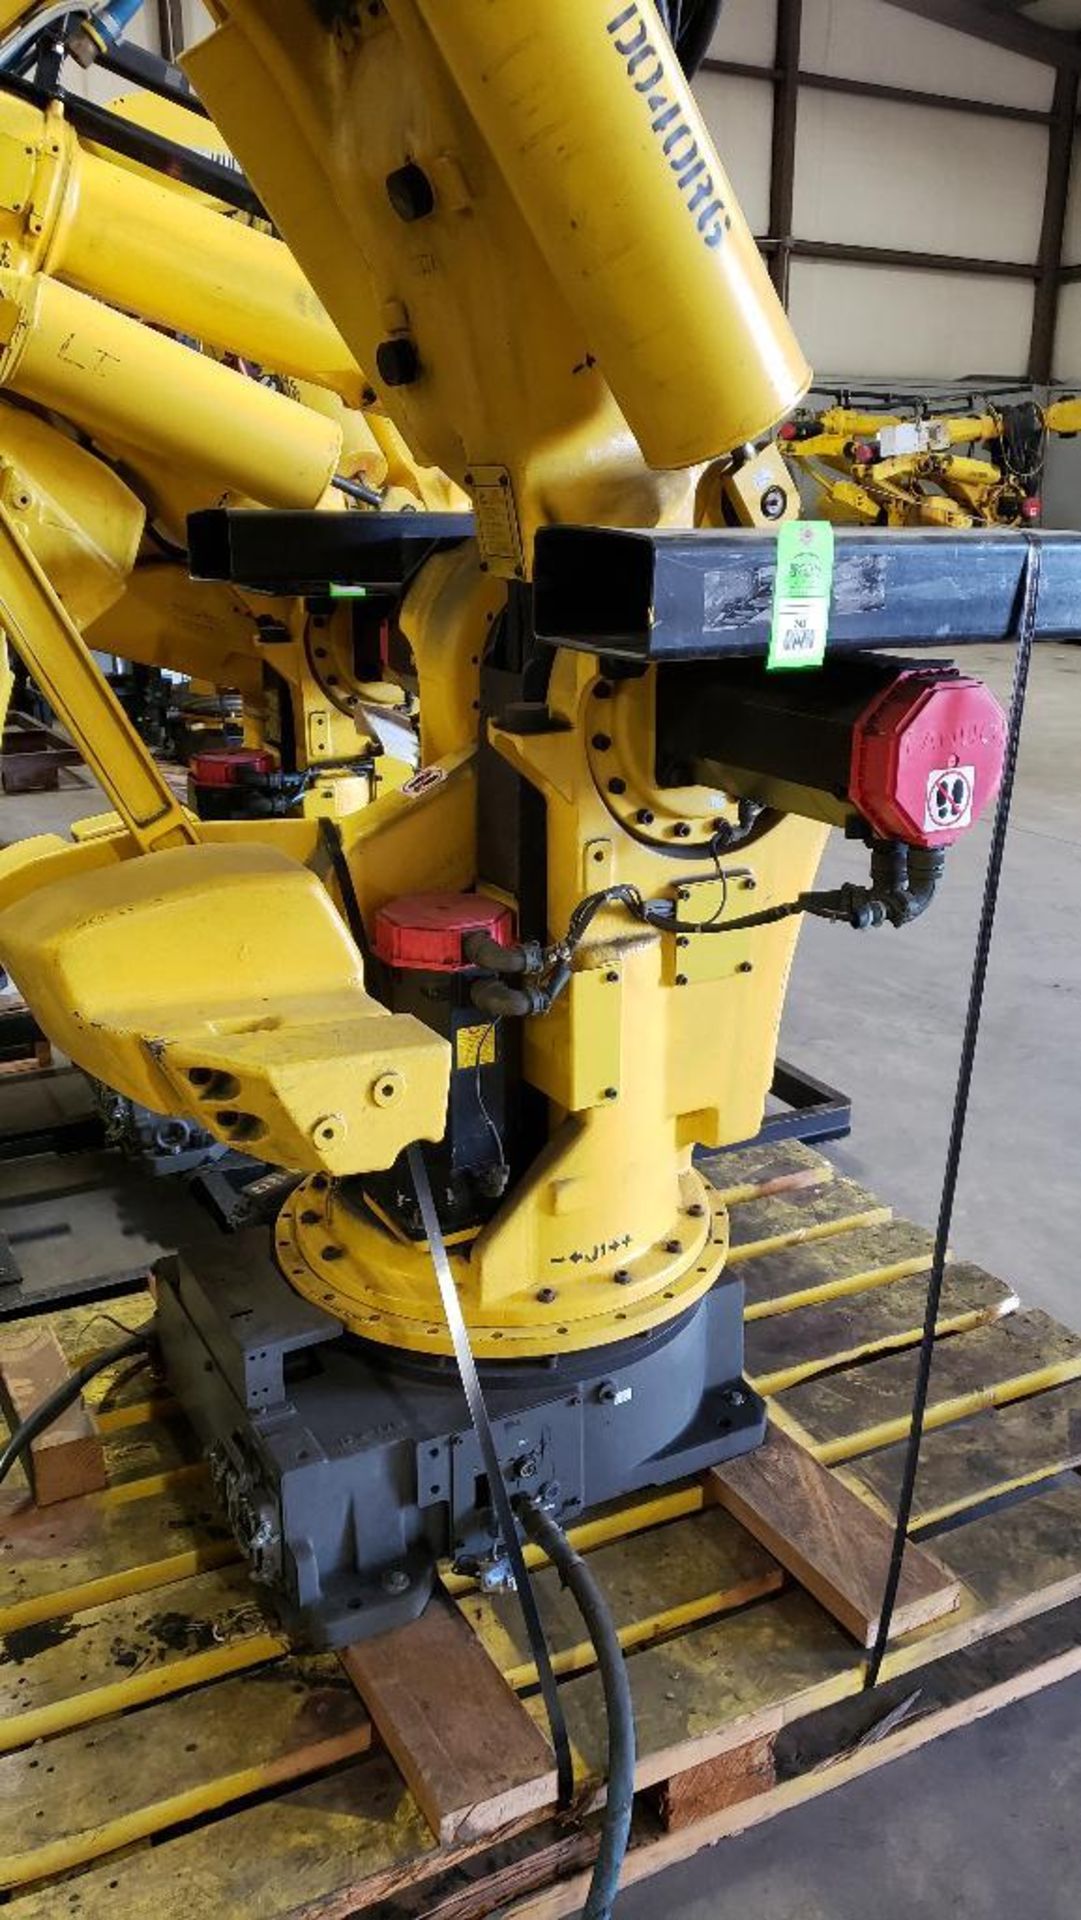 Fanuc S-420iW robot 6-axis arm. - Image 5 of 9